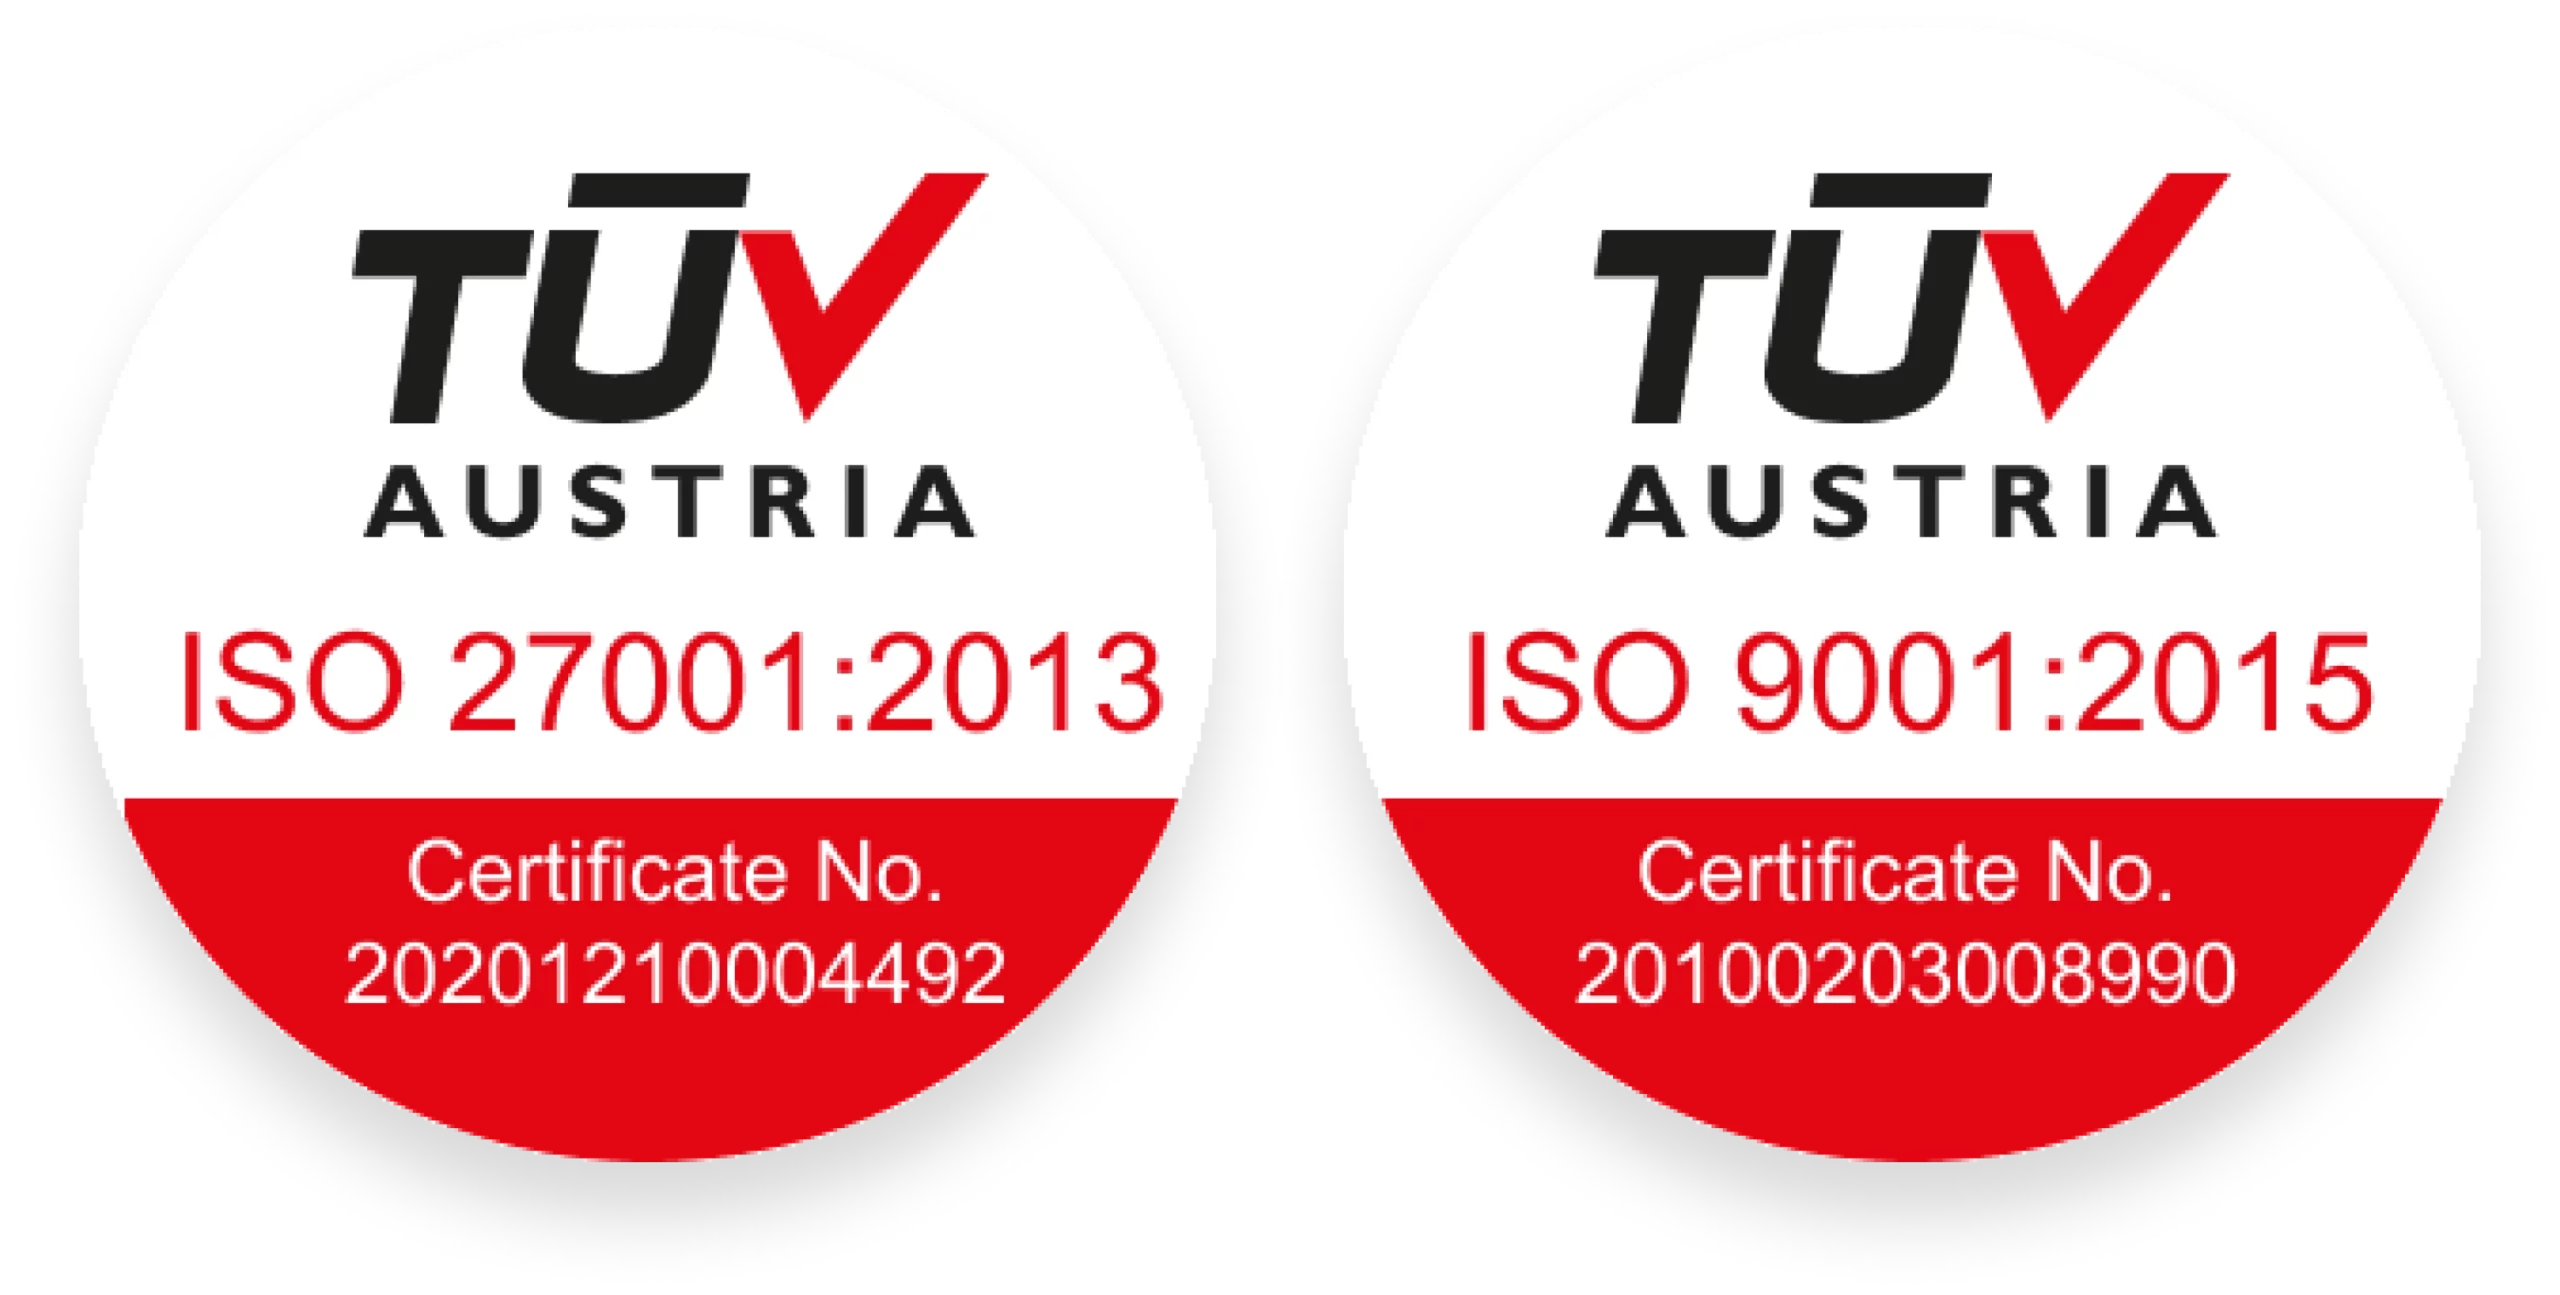 ISO 9001 and ISO 17001 certificates